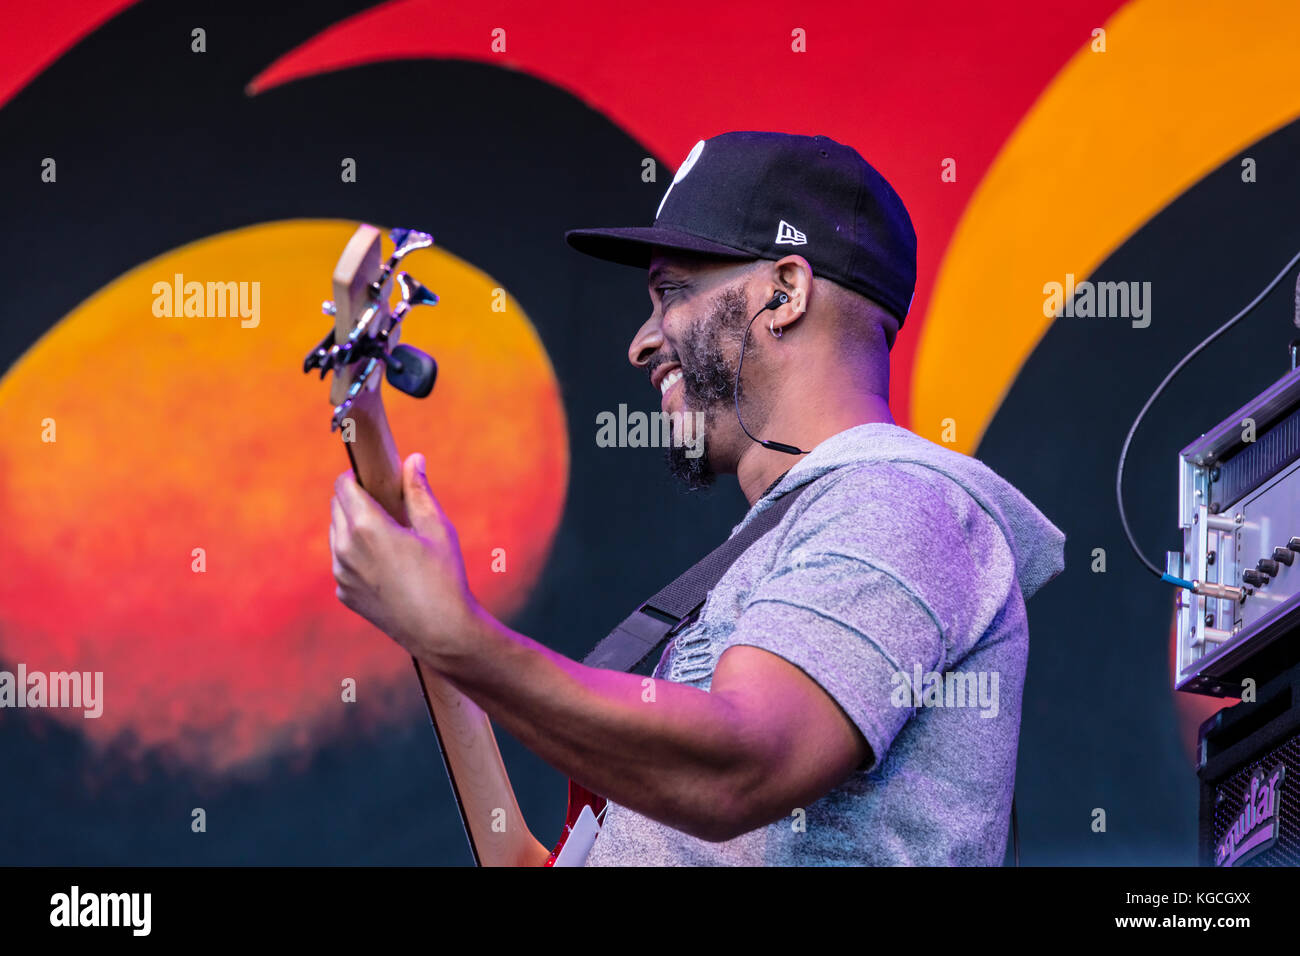 CLAY SEARS on guitar for ip hop artist COMMON pr- 60th MONTEREY JAZZ FESTIVAL, CALIFORNIA Stock Photo